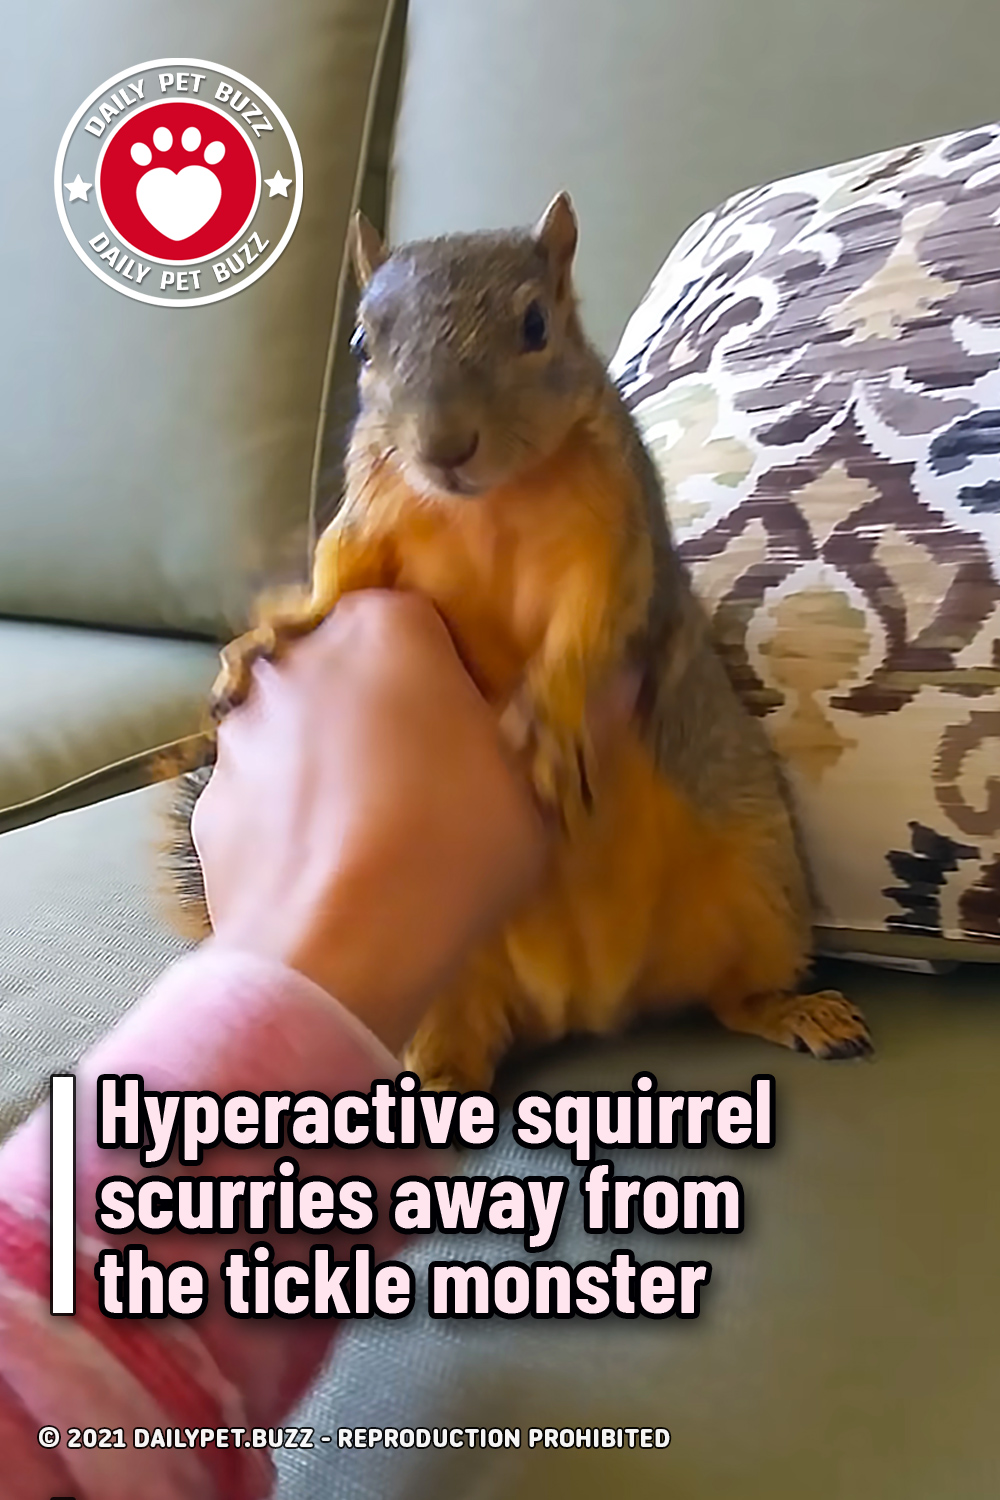 Hyperactive squirrel scurries away from the tickle monster